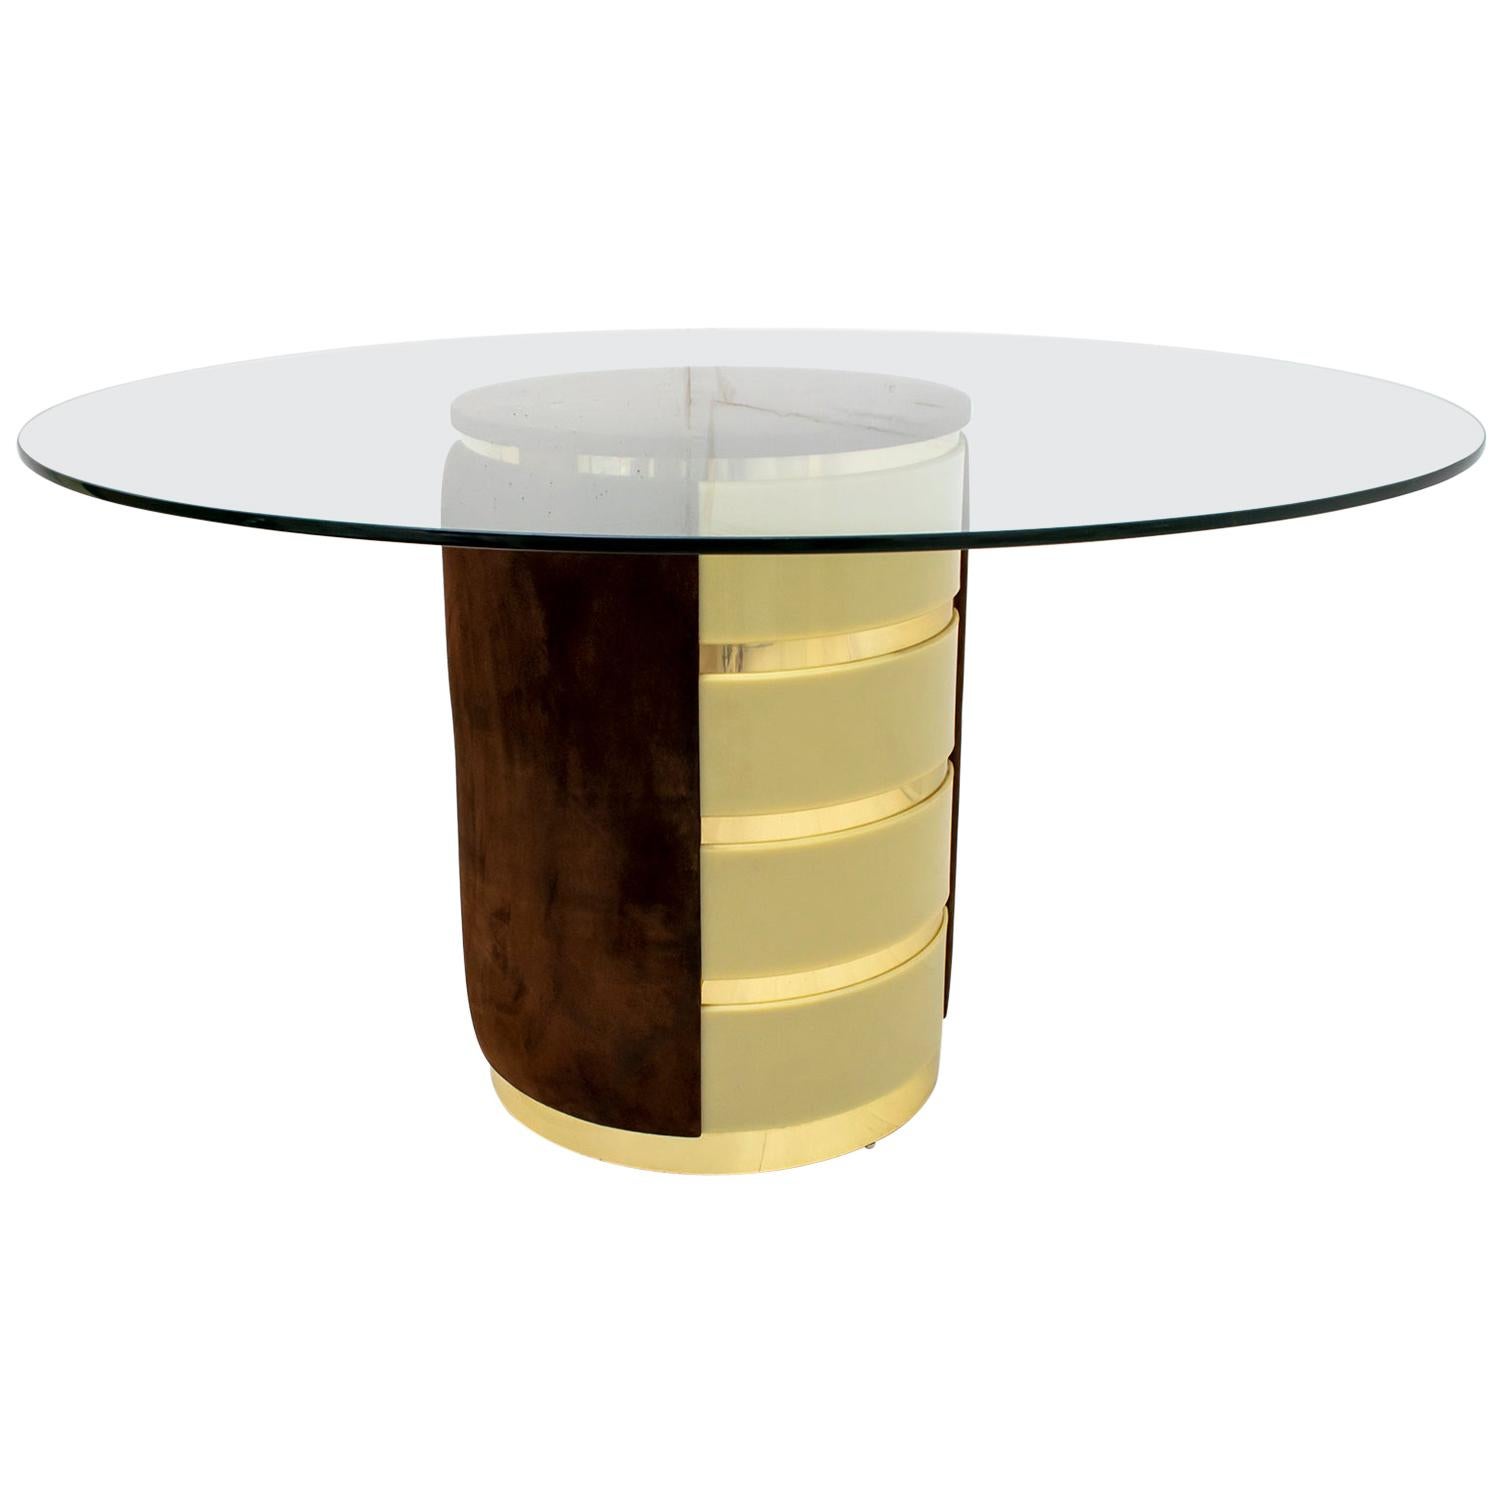 Willy Rizzo Mid-Century Modern Italian Suede and Plexiglass Dining Table, 1970s